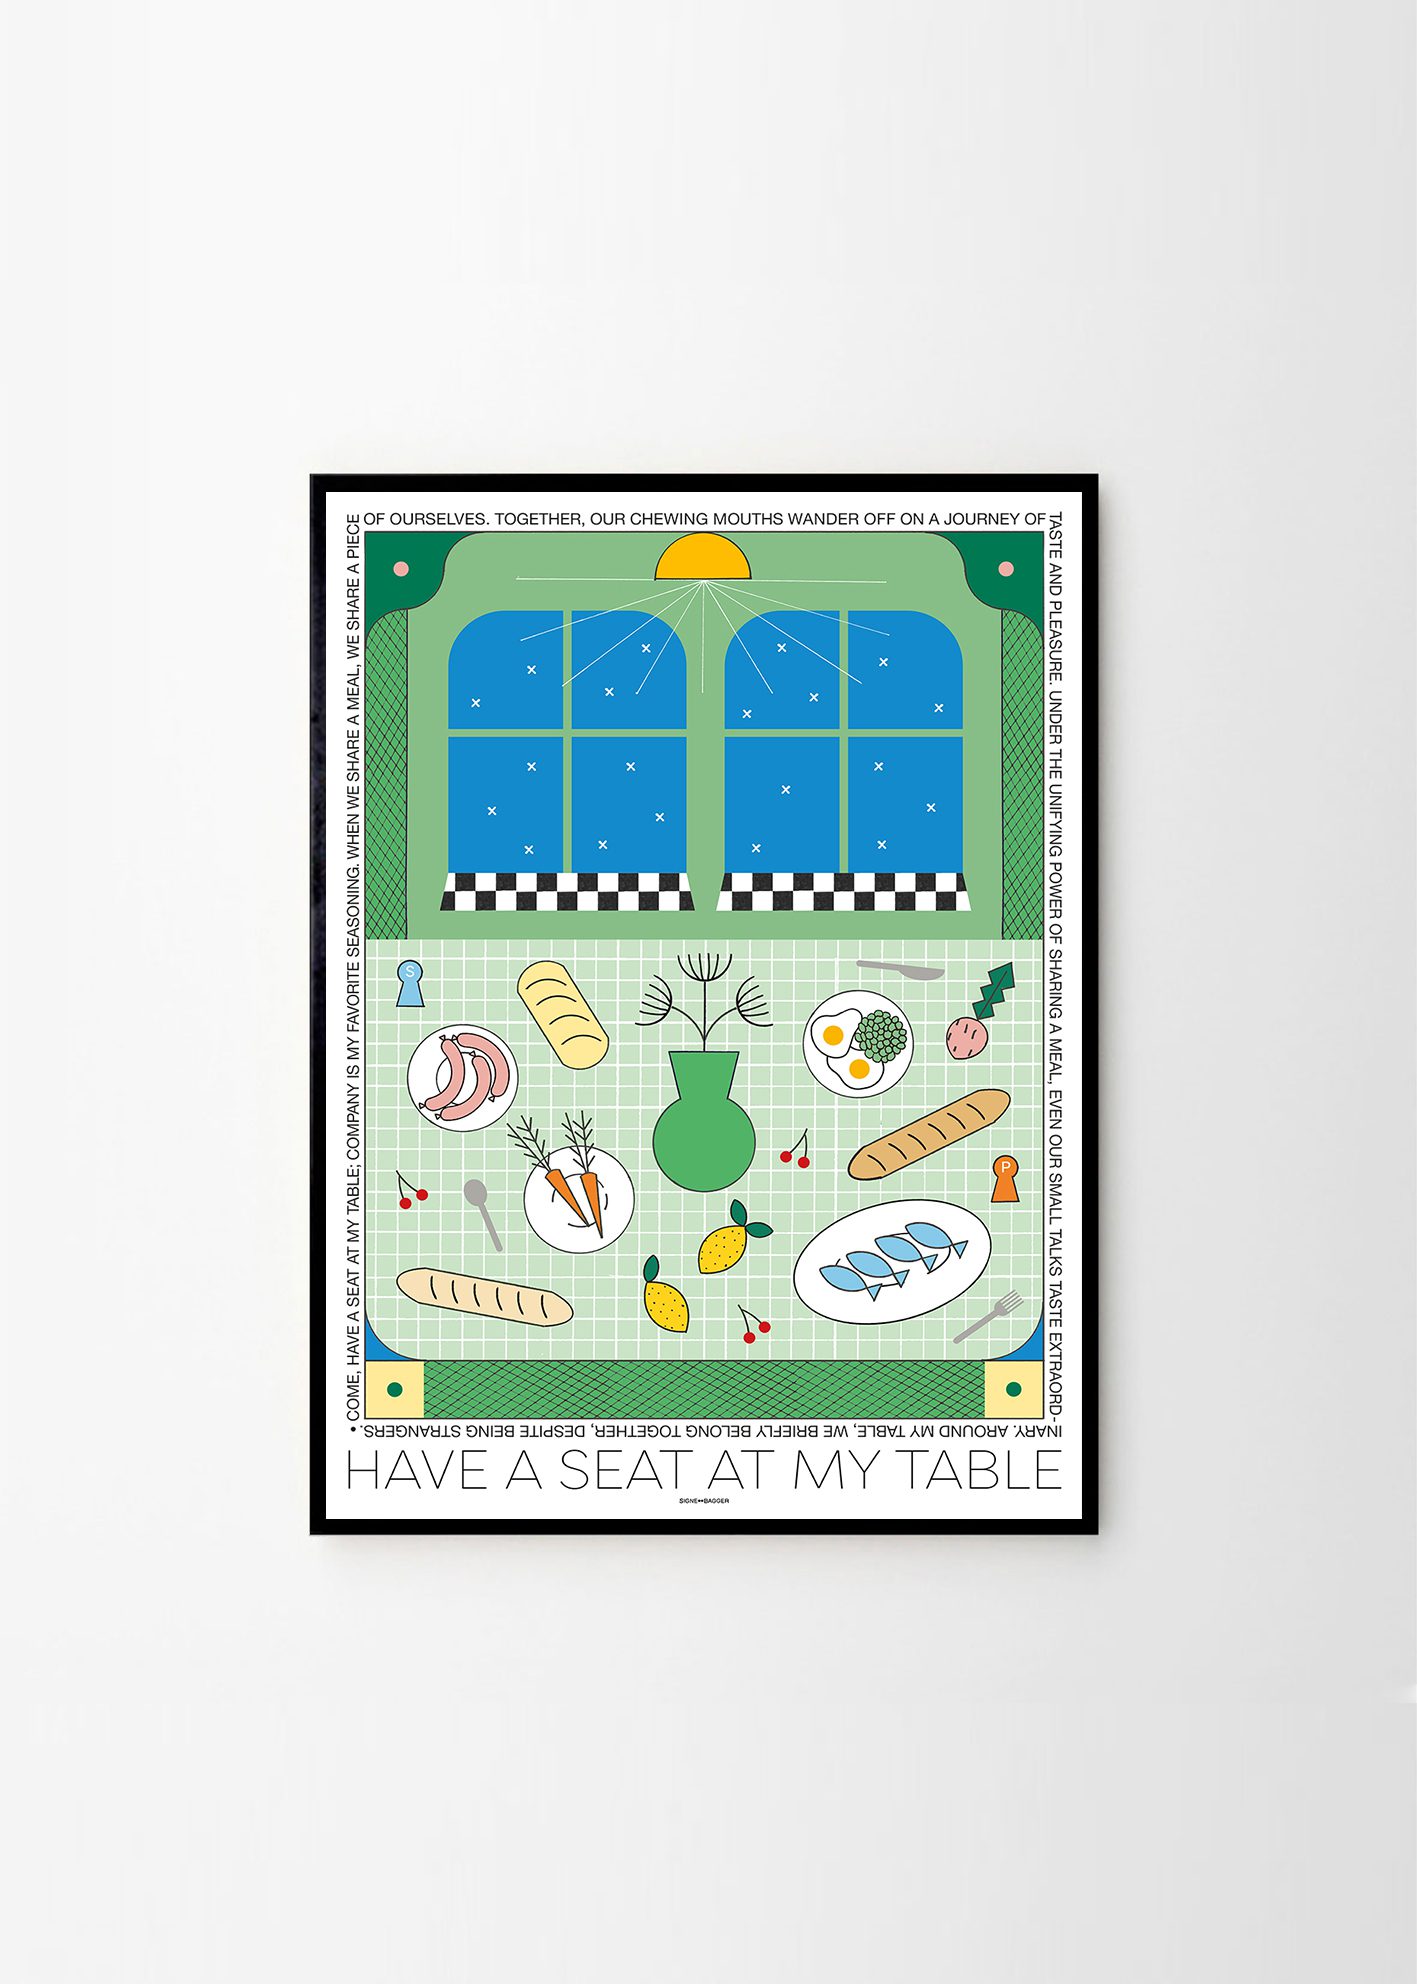 Signe Bagger, 'A Seat at my Table' art print for The Poster Club